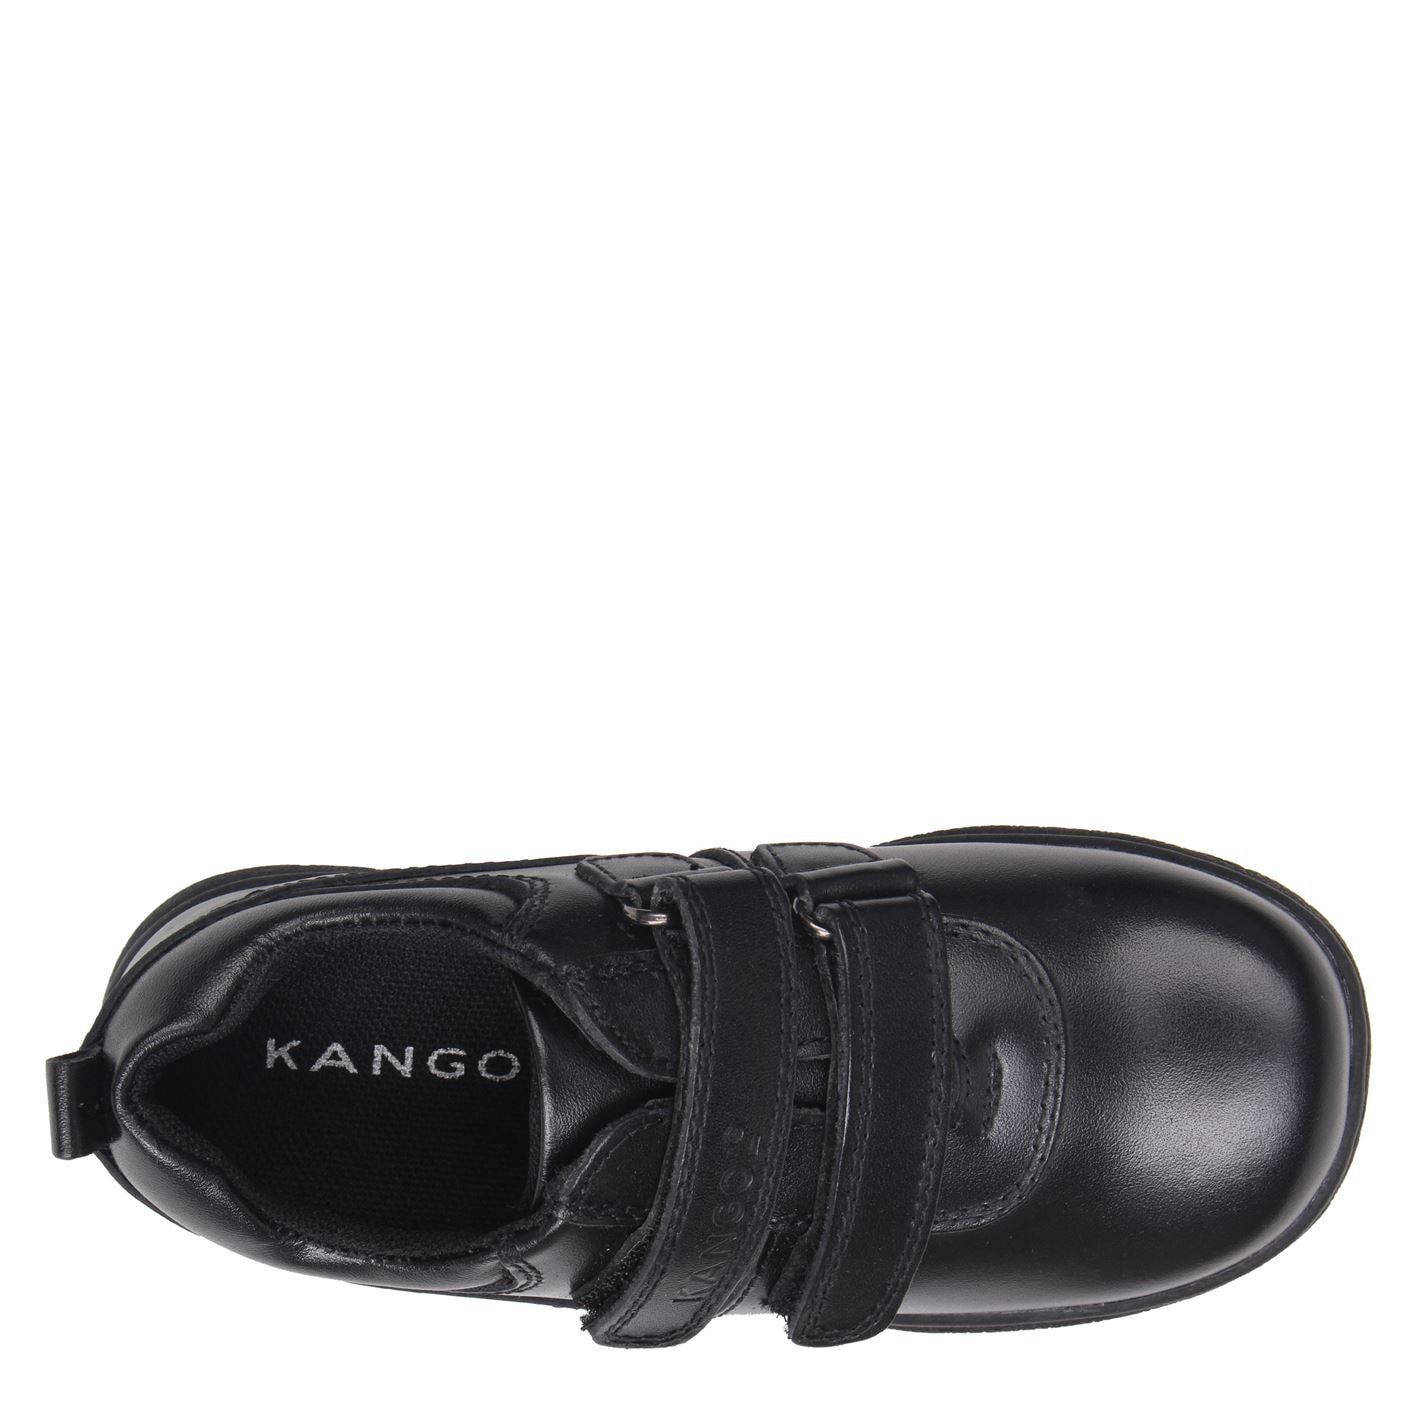 Kangol Kids Churston V Boys Hook and Loop Leather Everyday Casual Shoes